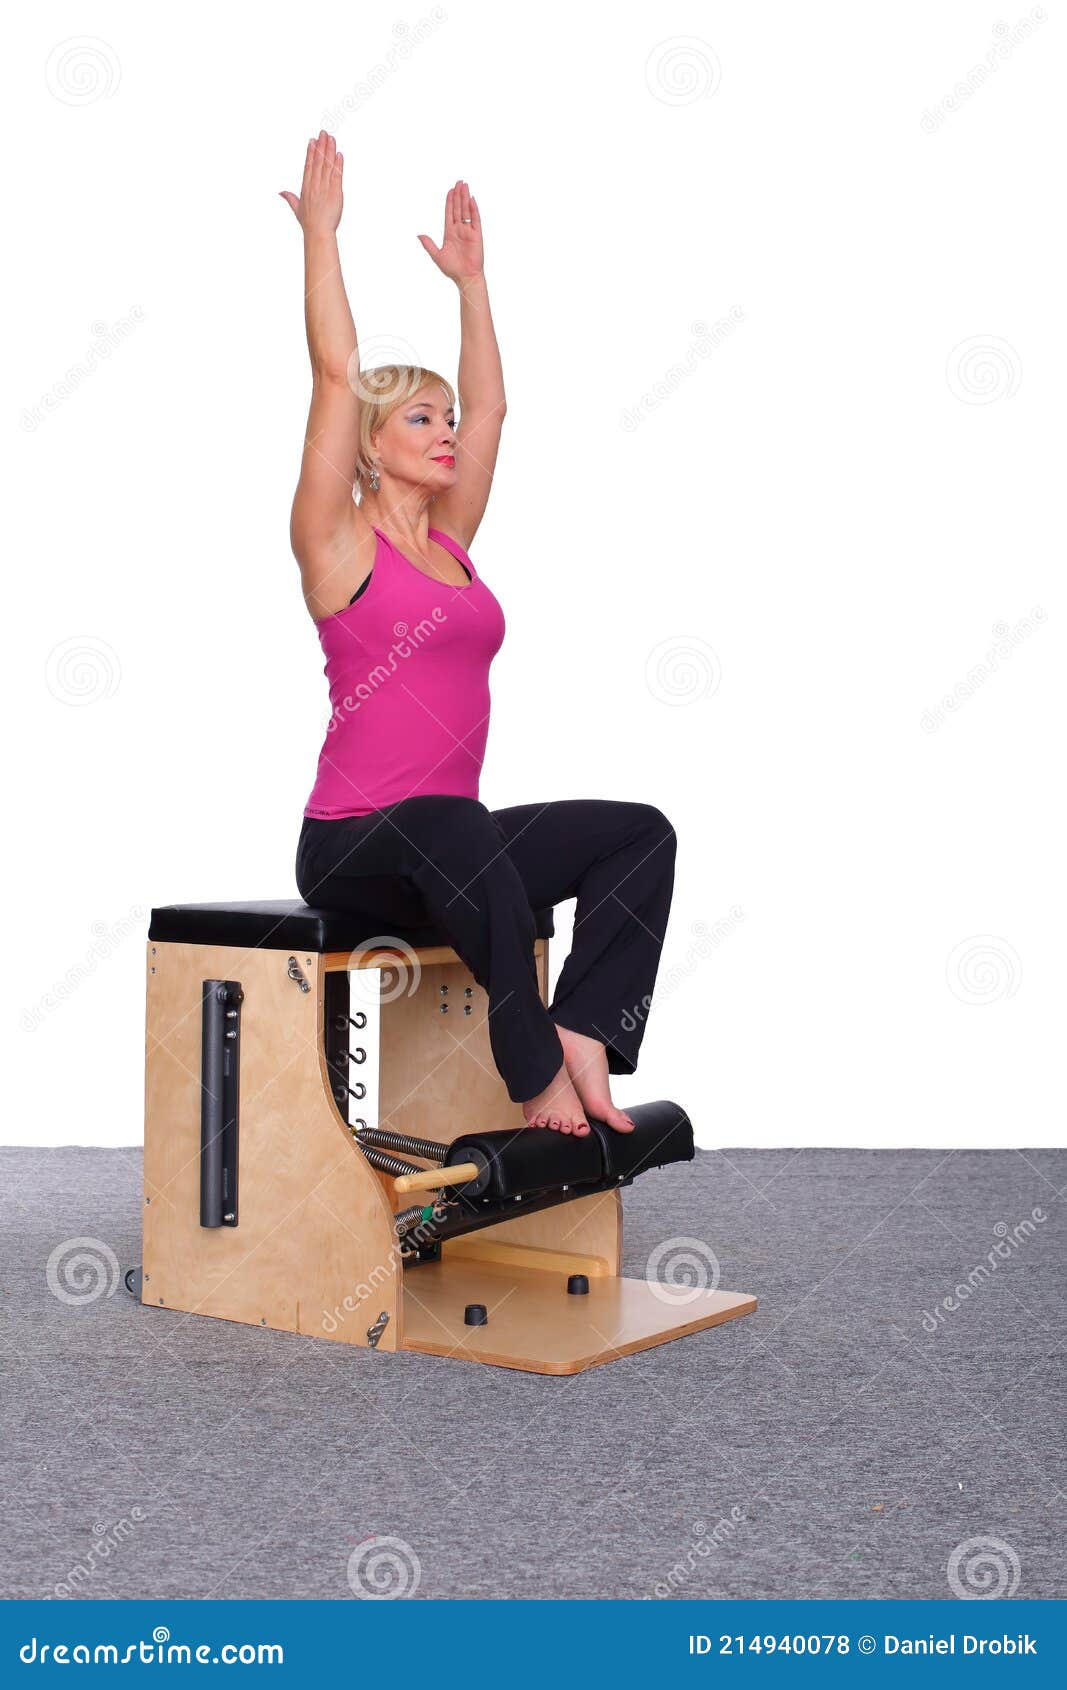 A 50-year-old Trainer Practices Pilates on an Elevator Chair